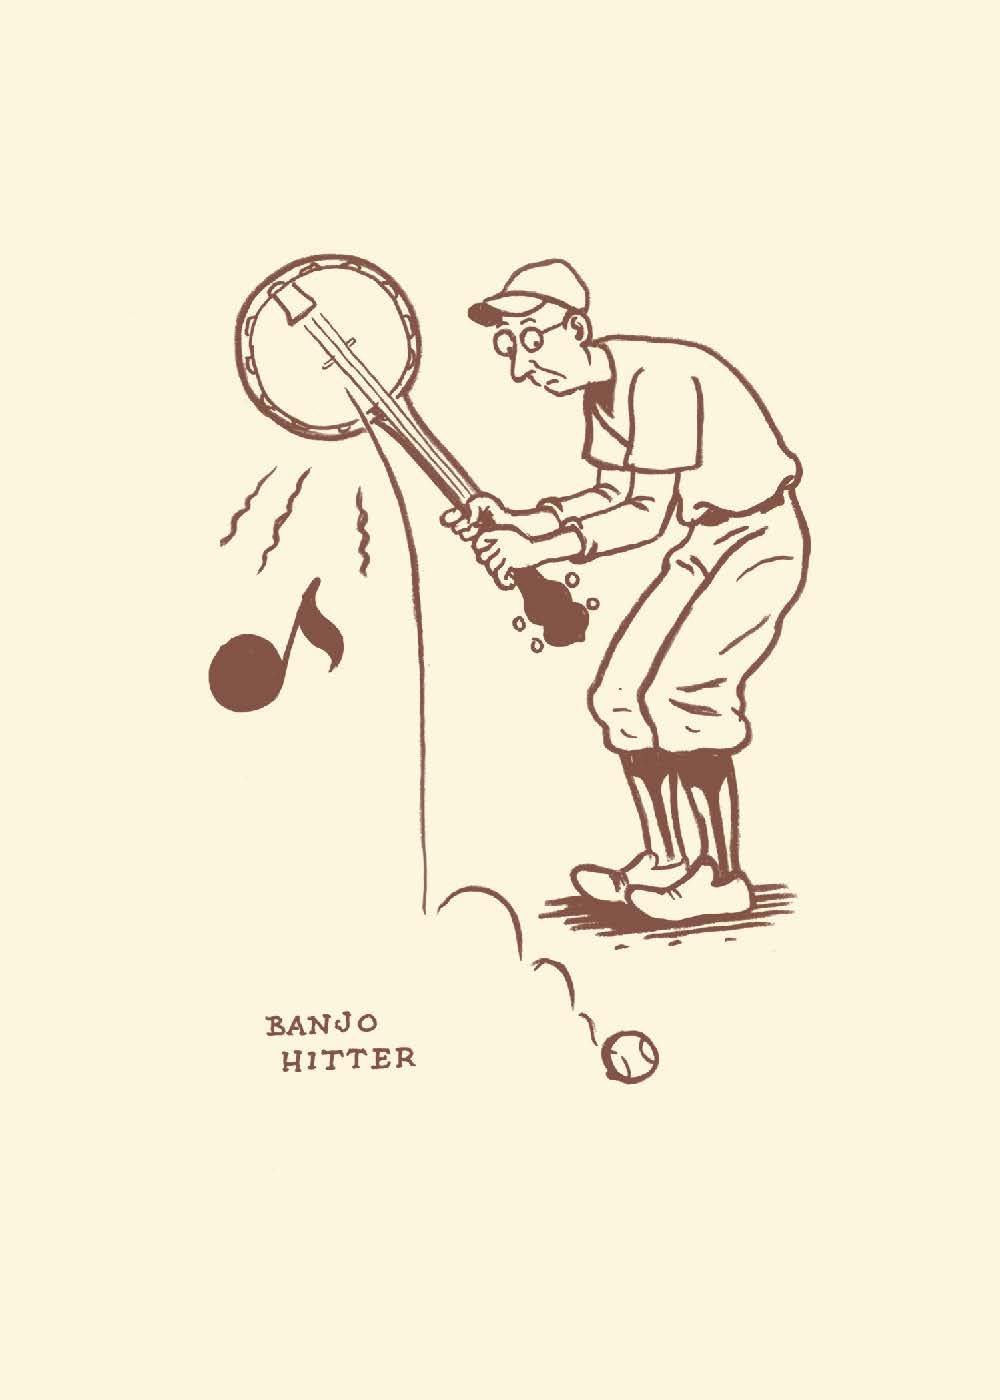 How to Speak Baseball: An Illustrated Guide to Ballpark Banter - D'Autores